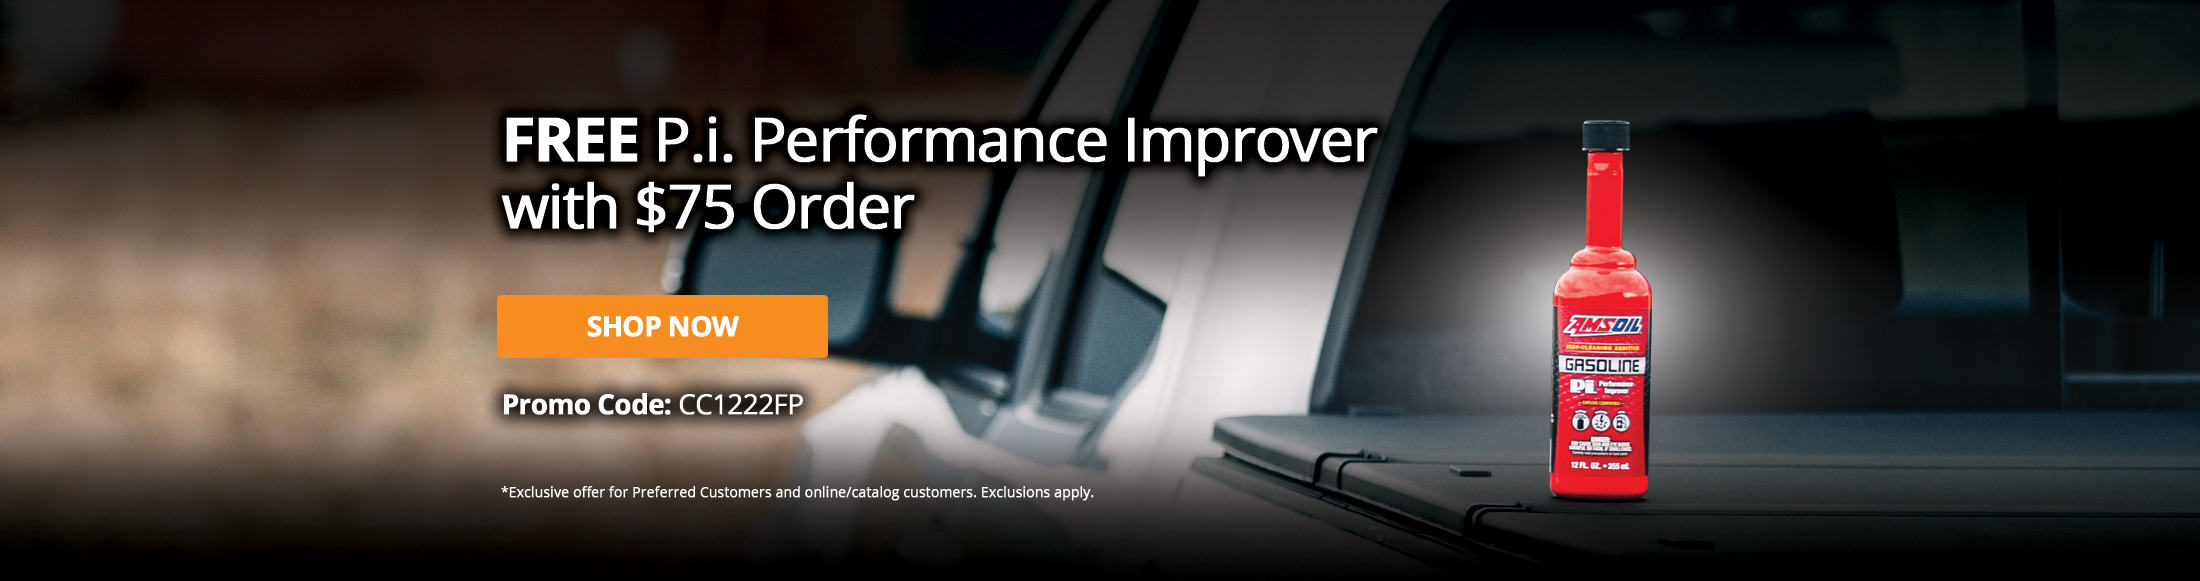 Free P.i. Performance Improver with $75 Order